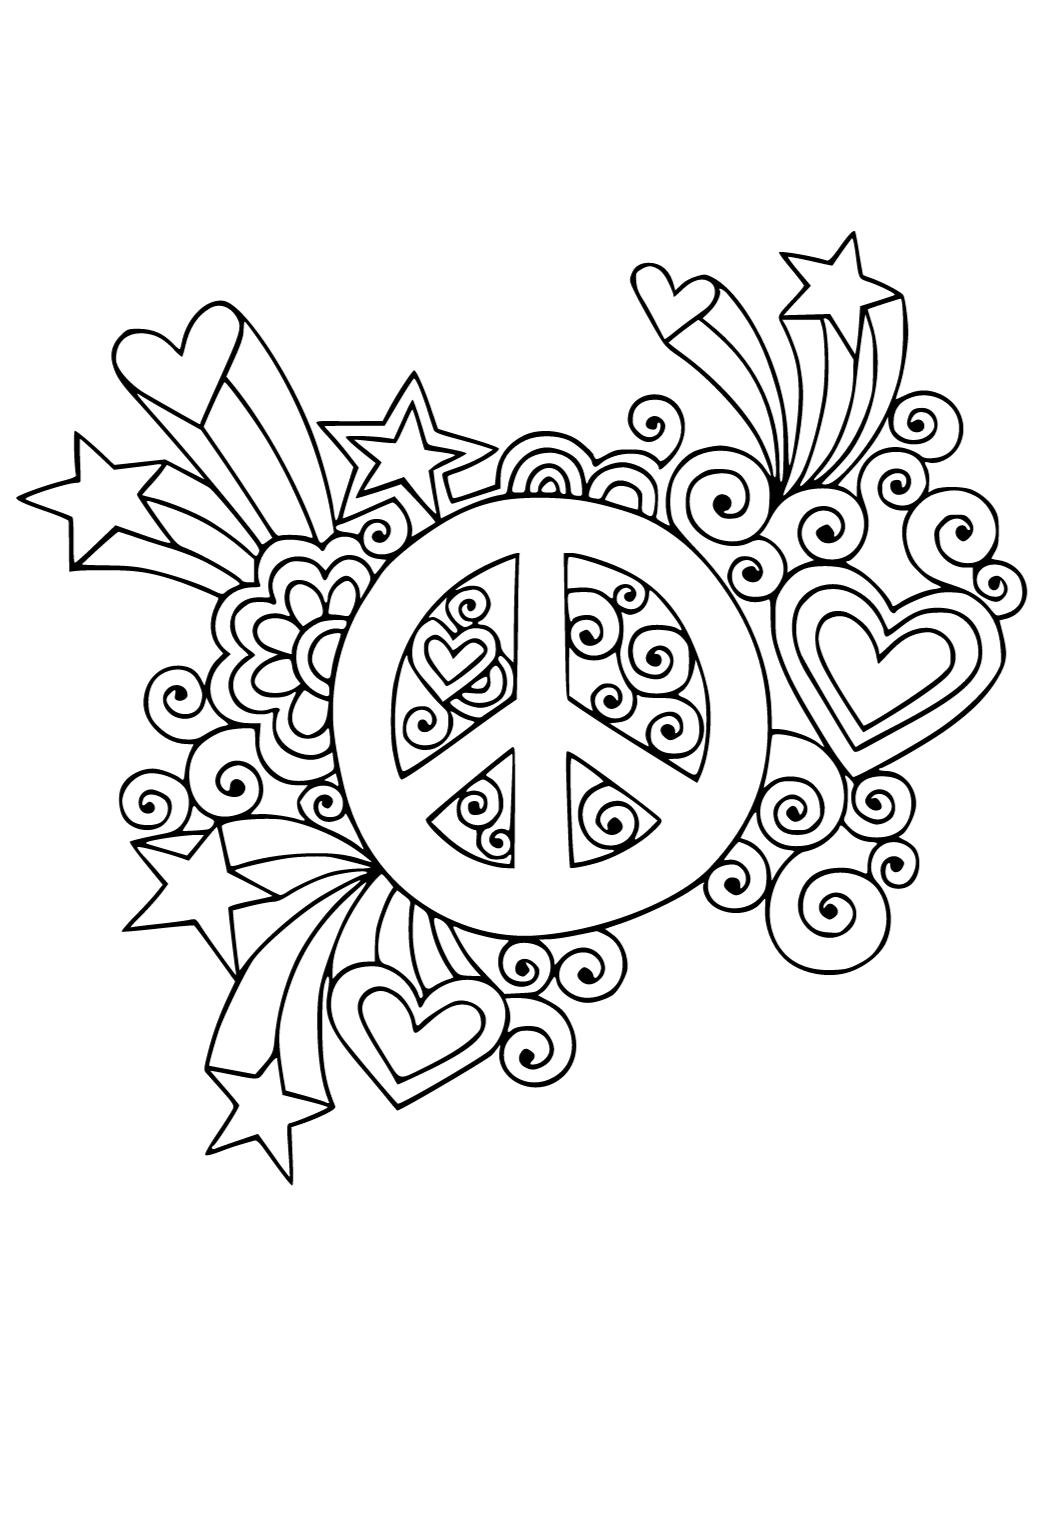 Free printable peace sign heart coloring page for adults and kids